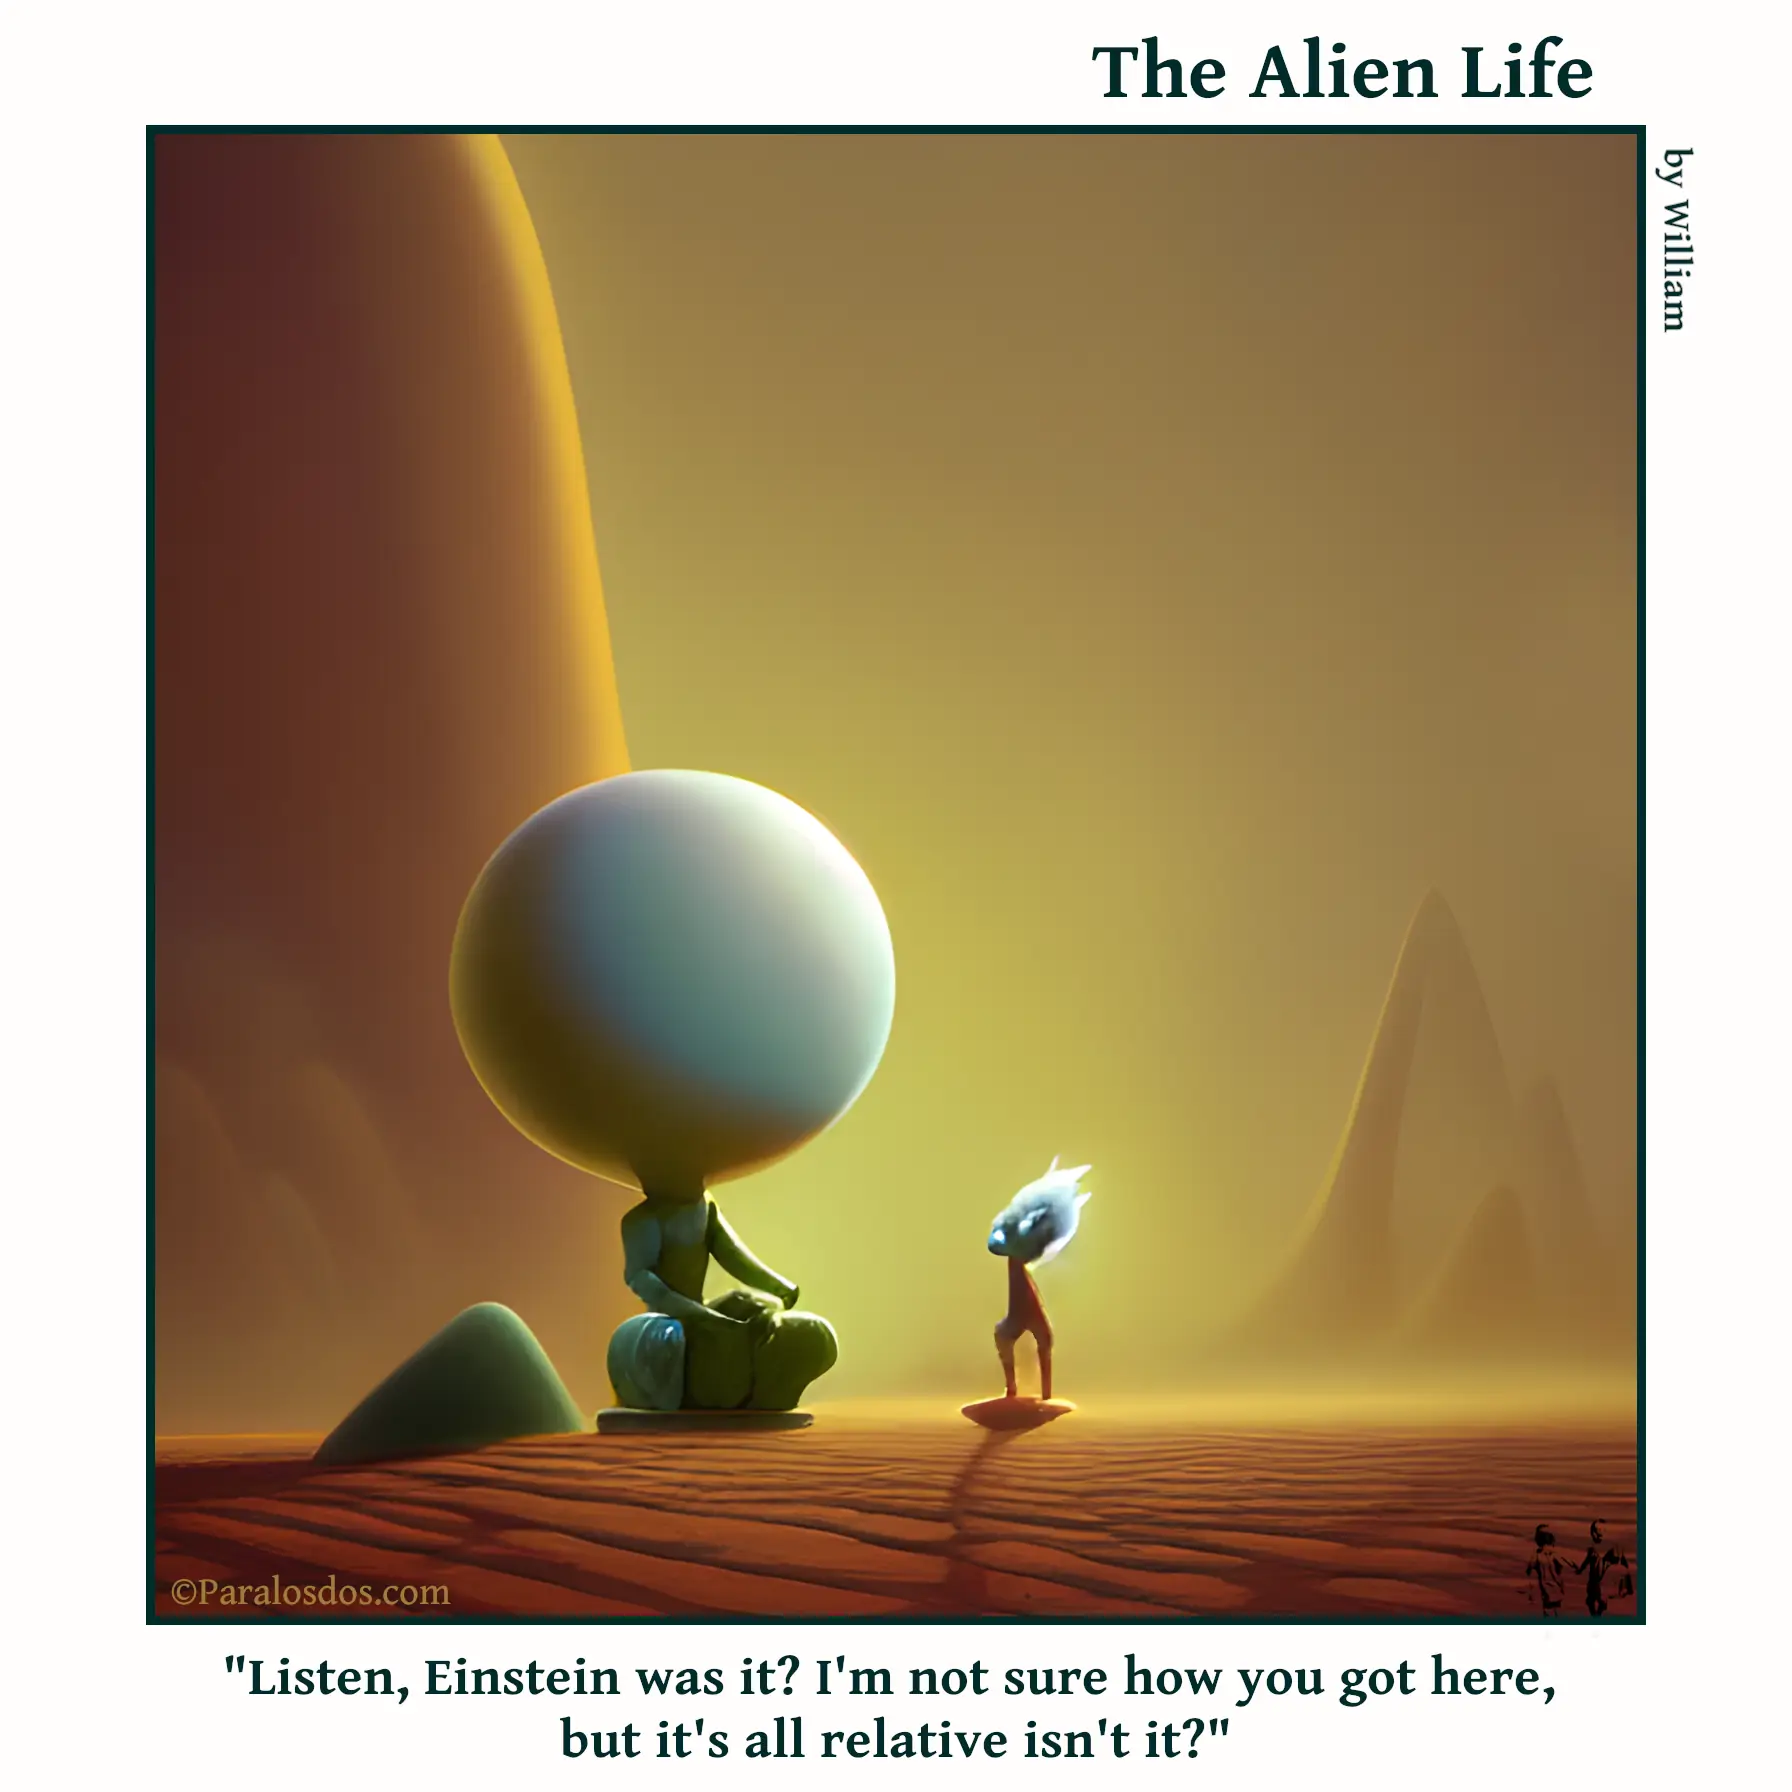 The Alien Life, one panel Comic. A small human figure with crazy white hair is standing in front of a big seated alien. The caption reads: "Listen, Einstein was it? I'm not sure how you got here, but it's all relative isn't it?"